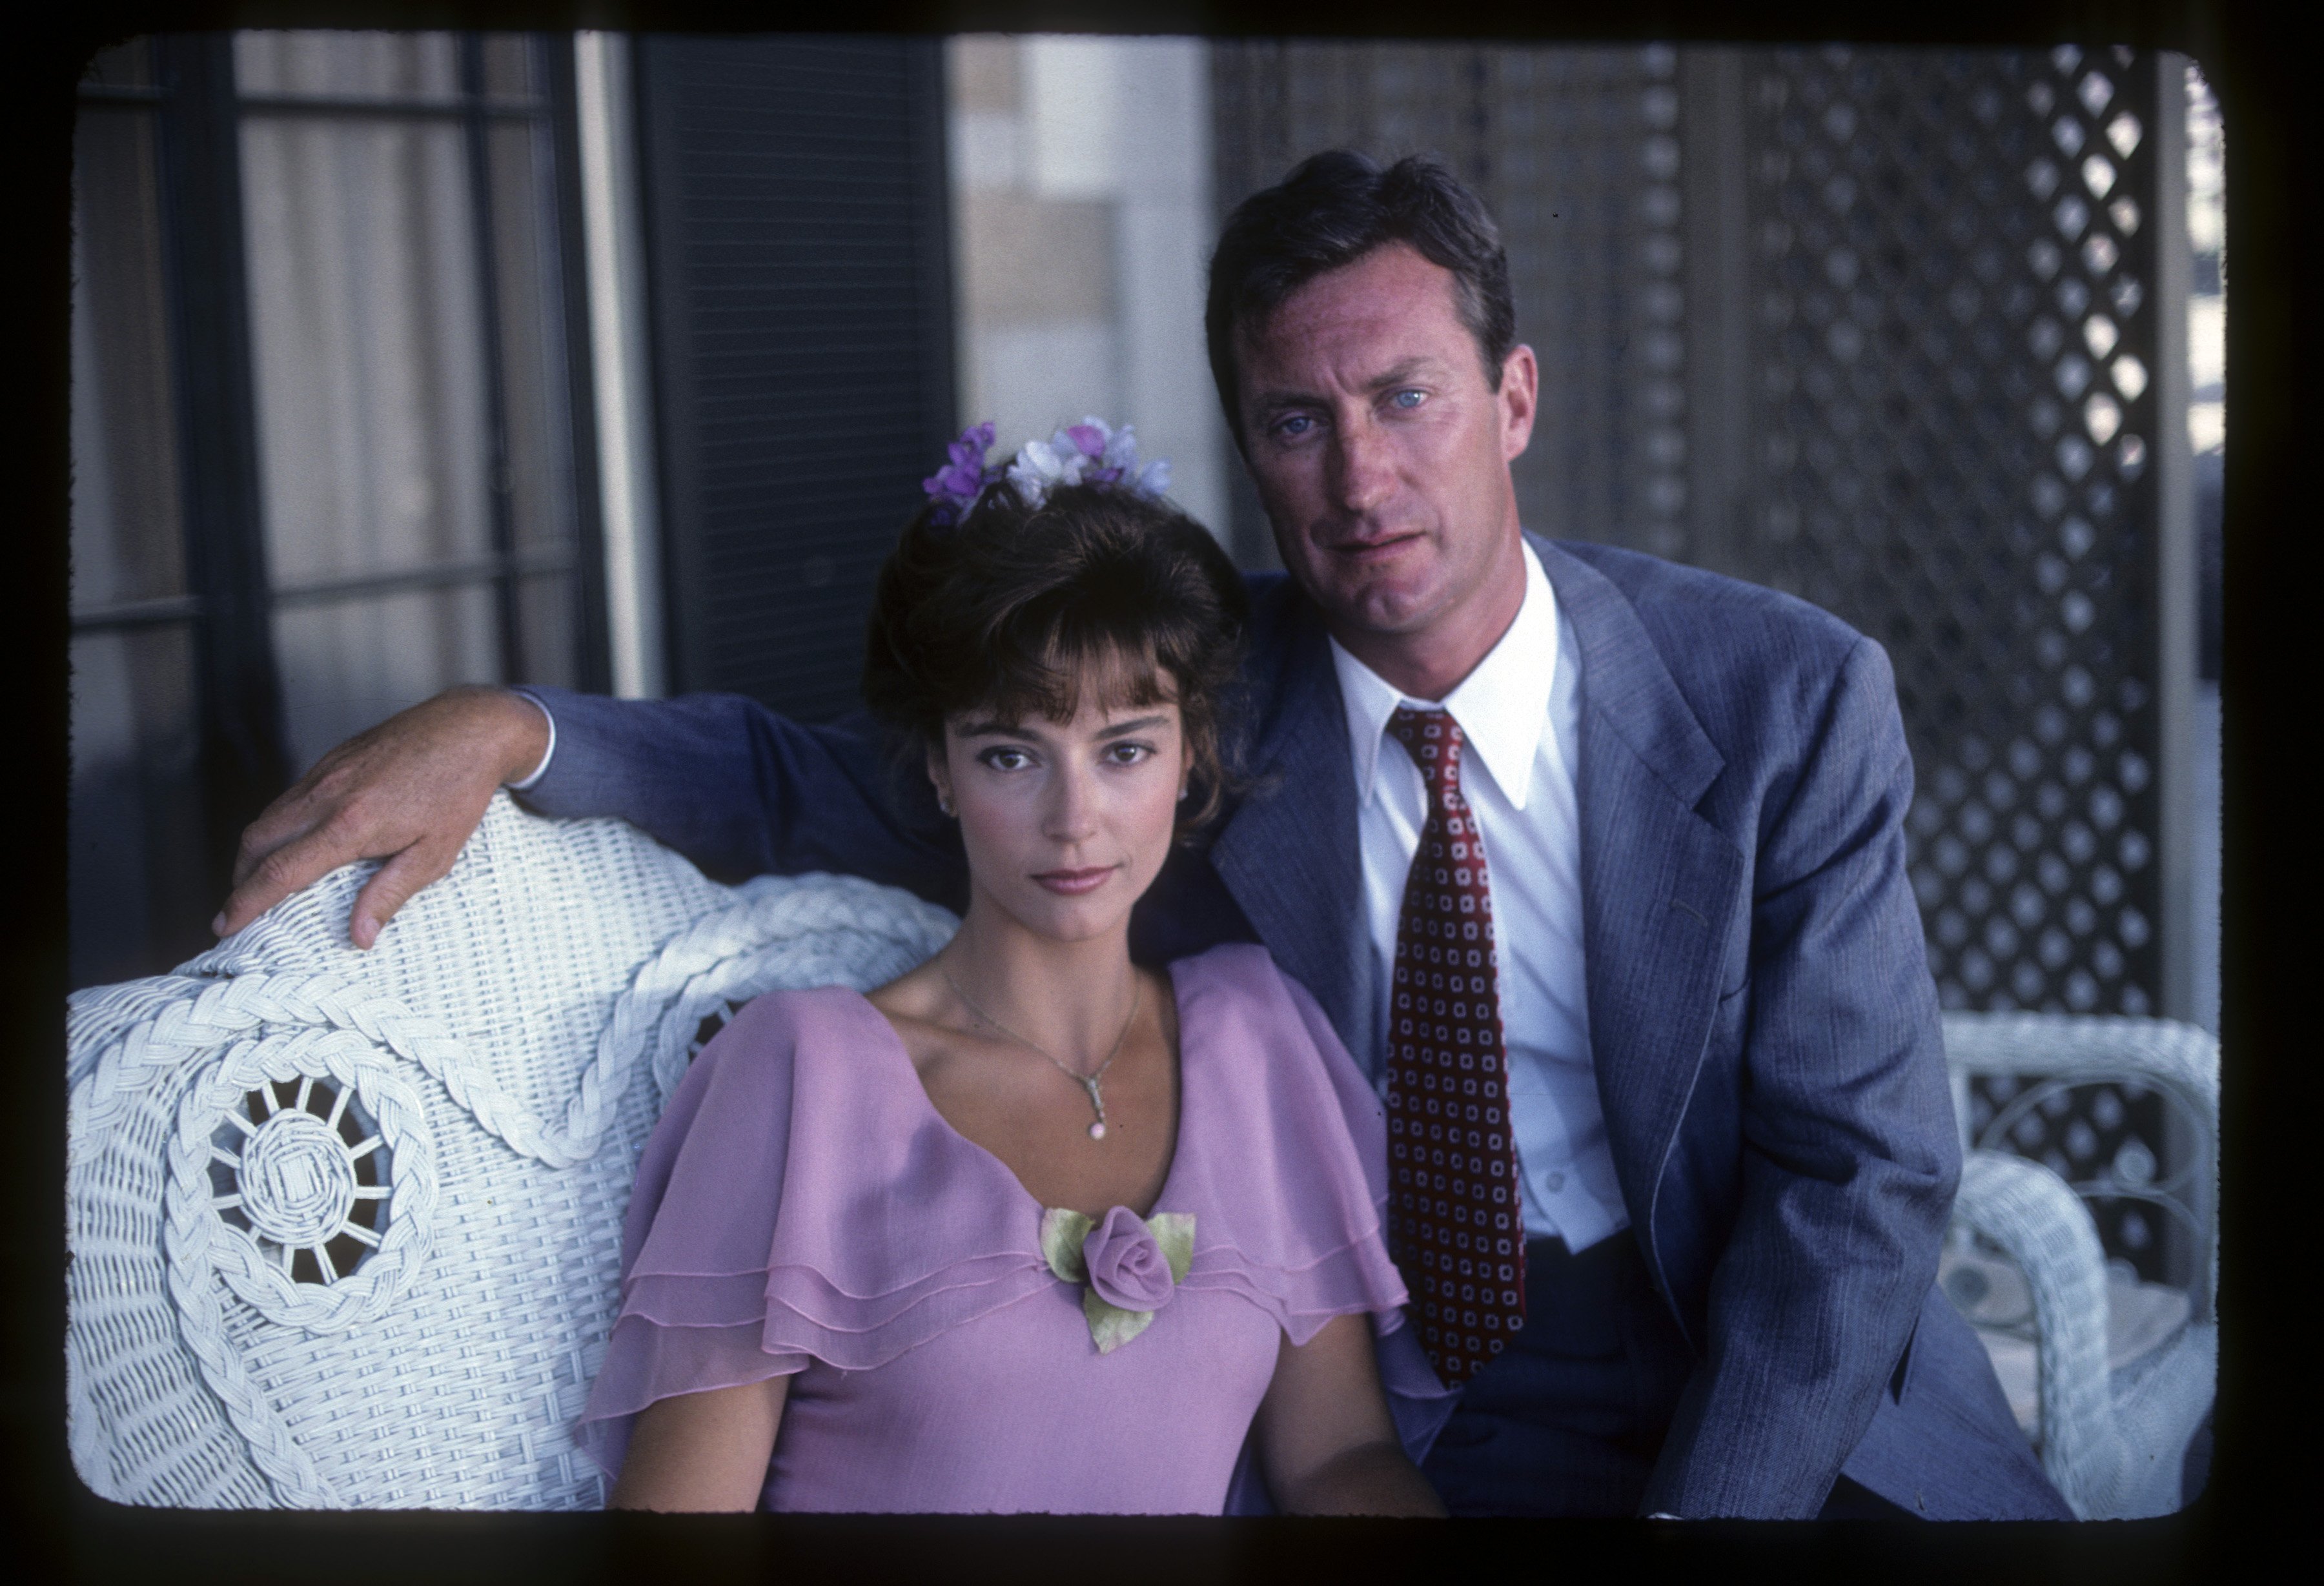 Rachel Ward and Bryan Brown on the TV miniseries, "The Thorn Birds" which aired March 27 through 30, 1983. | Source: Getty Images